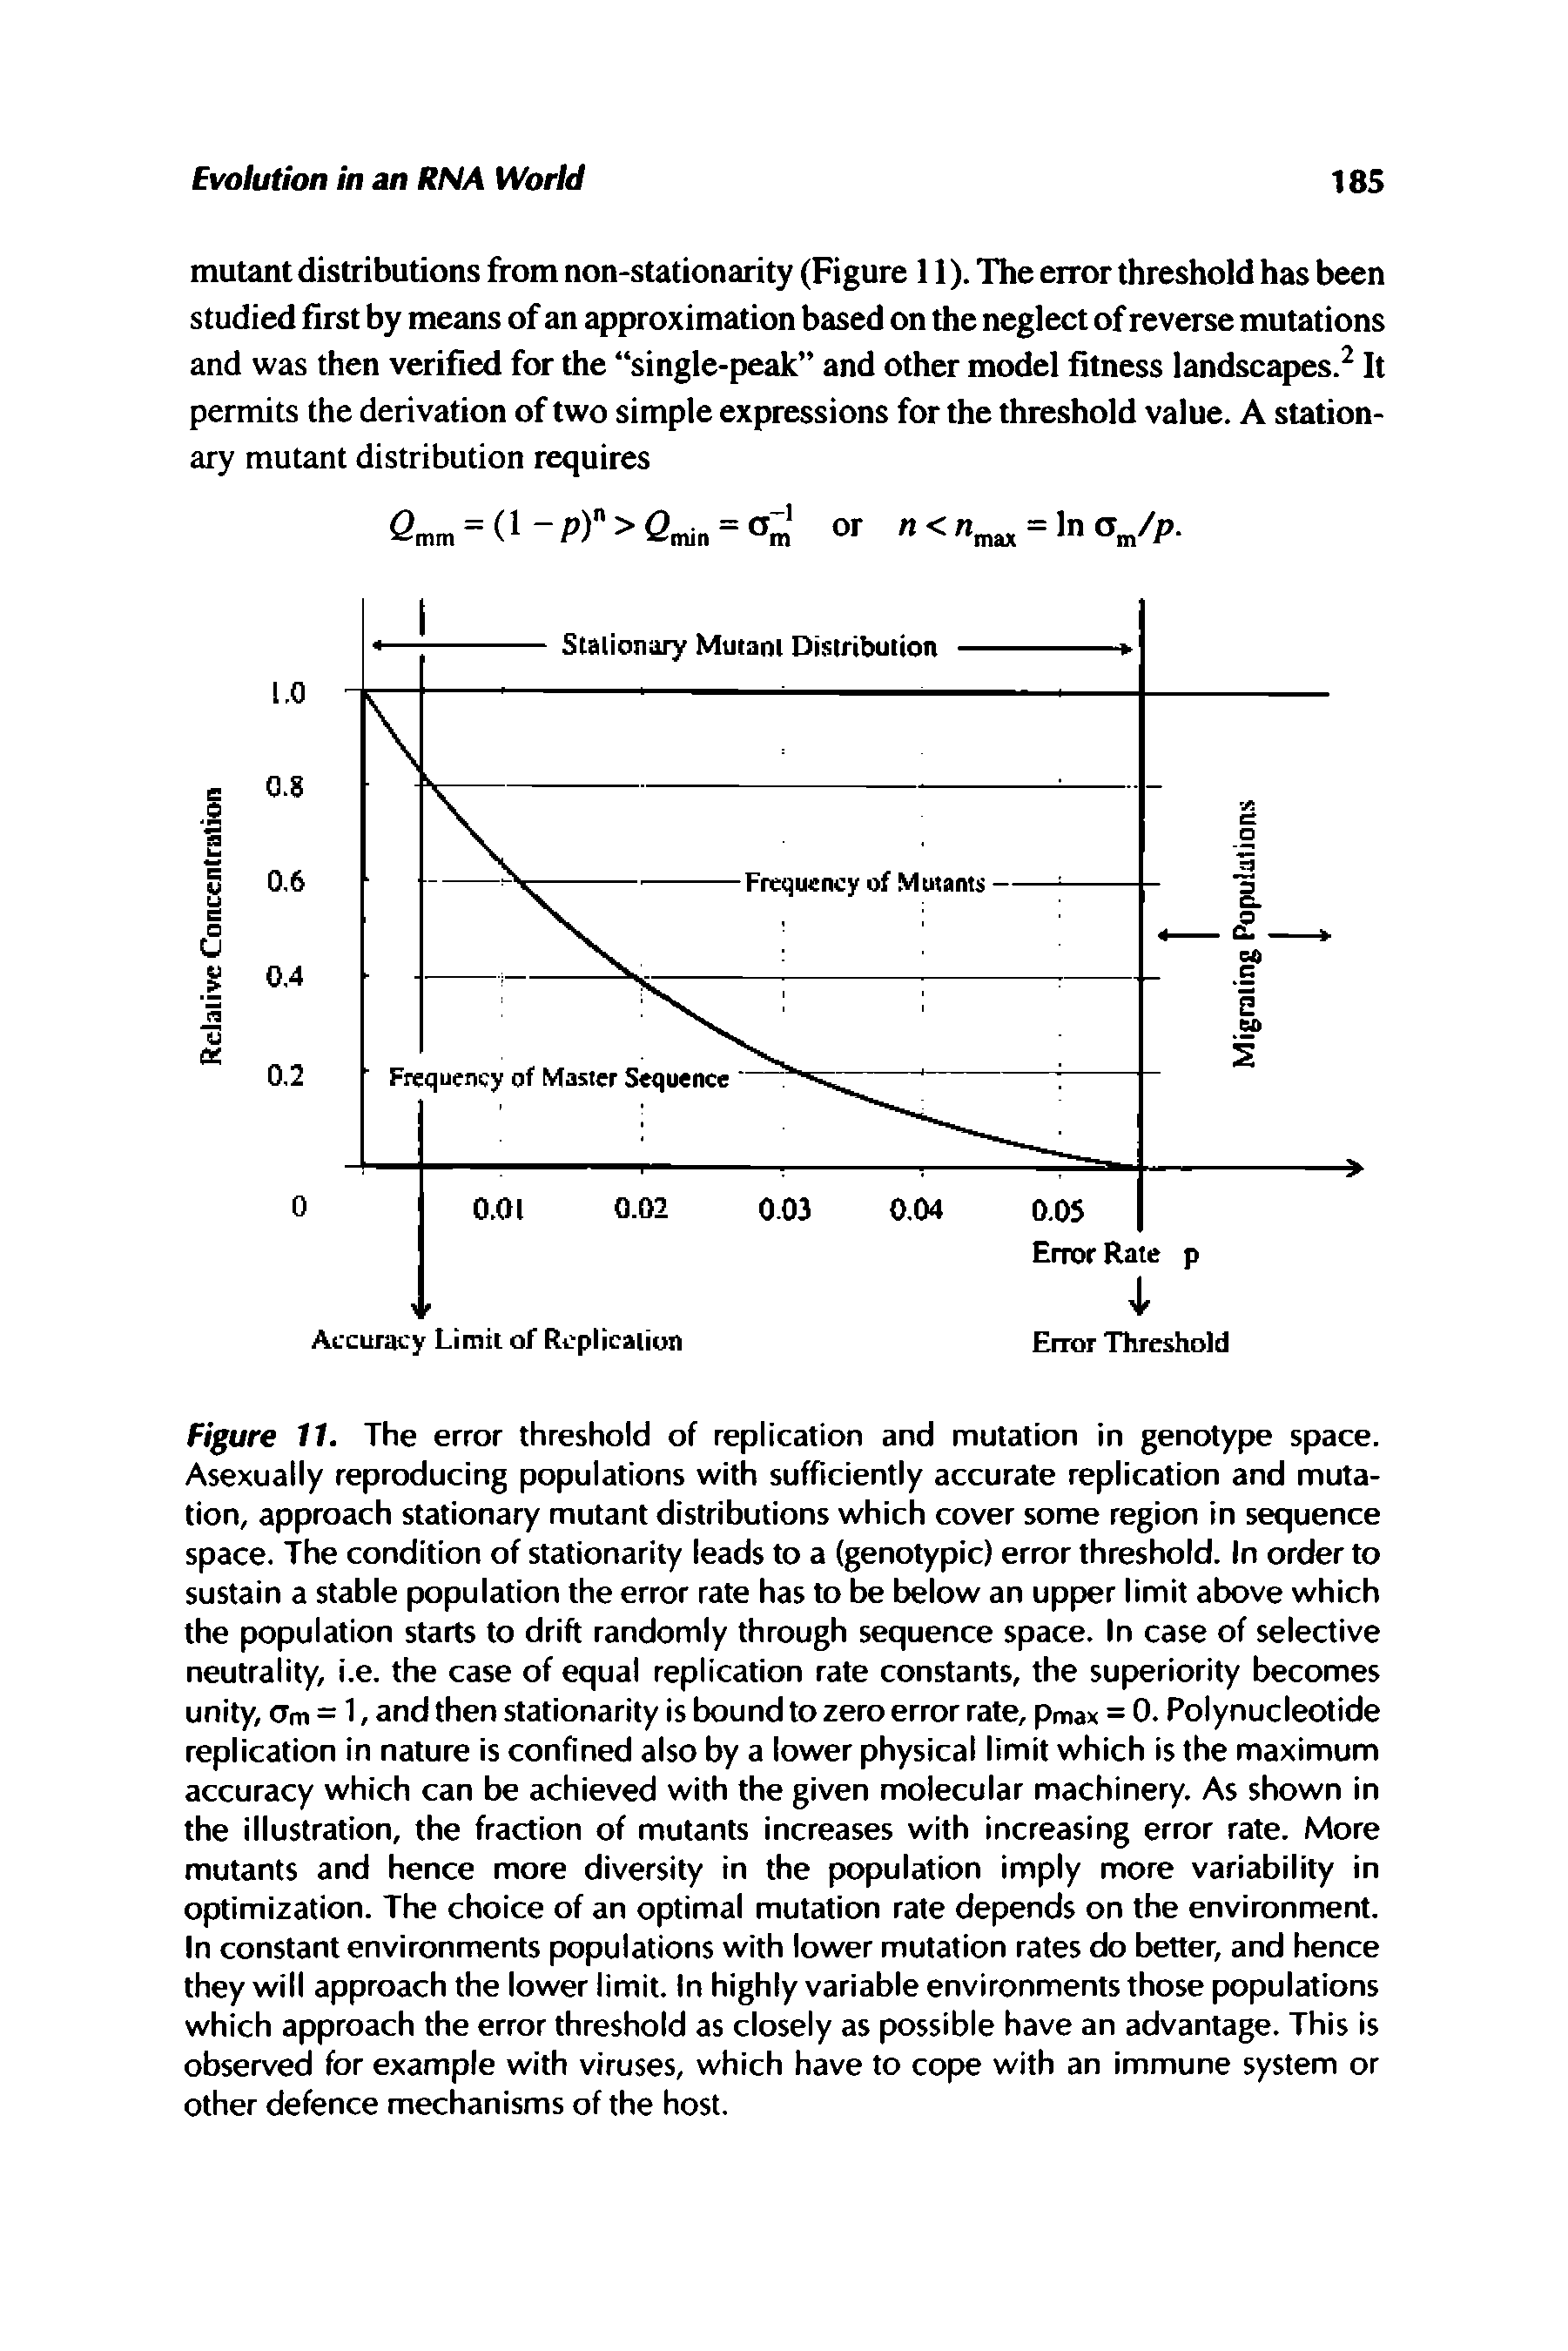 Figure 11. The error threshold of replication and mutation in genotype space. Asexually reproducing populations with sufficiently accurate replication and mutation, approach stationary mutant distributions which cover some region in sequence space. The condition of stationarity leads to a (genotypic) error threshold. In order to sustain a stable population the error rate has to be below an upper limit above which the population starts to drift randomly through sequence space. In case of selective neutrality, i.e. the case of equal replication rate constants, the superiority becomes unity, Om = 1, and then stationarity is bound to zero error rate, pmax = 0. Polynucleotide replication in nature is confined also by a lower physical limit which is the maximum accuracy which can be achieved with the given molecular machinery. As shown in the illustration, the fraction of mutants increases with increasing error rate. More mutants and hence more diversity in the population imply more variability in optimization. The choice of an optimal mutation rate depends on the environment. In constant environments populations with lower mutation rates do better, and hence they will approach the lower limit. In highly variable environments those populations which approach the error threshold as closely as possible have an advantage. This is observed for example with viruses, which have to cope with an immune system or other defence mechanisms of the host.